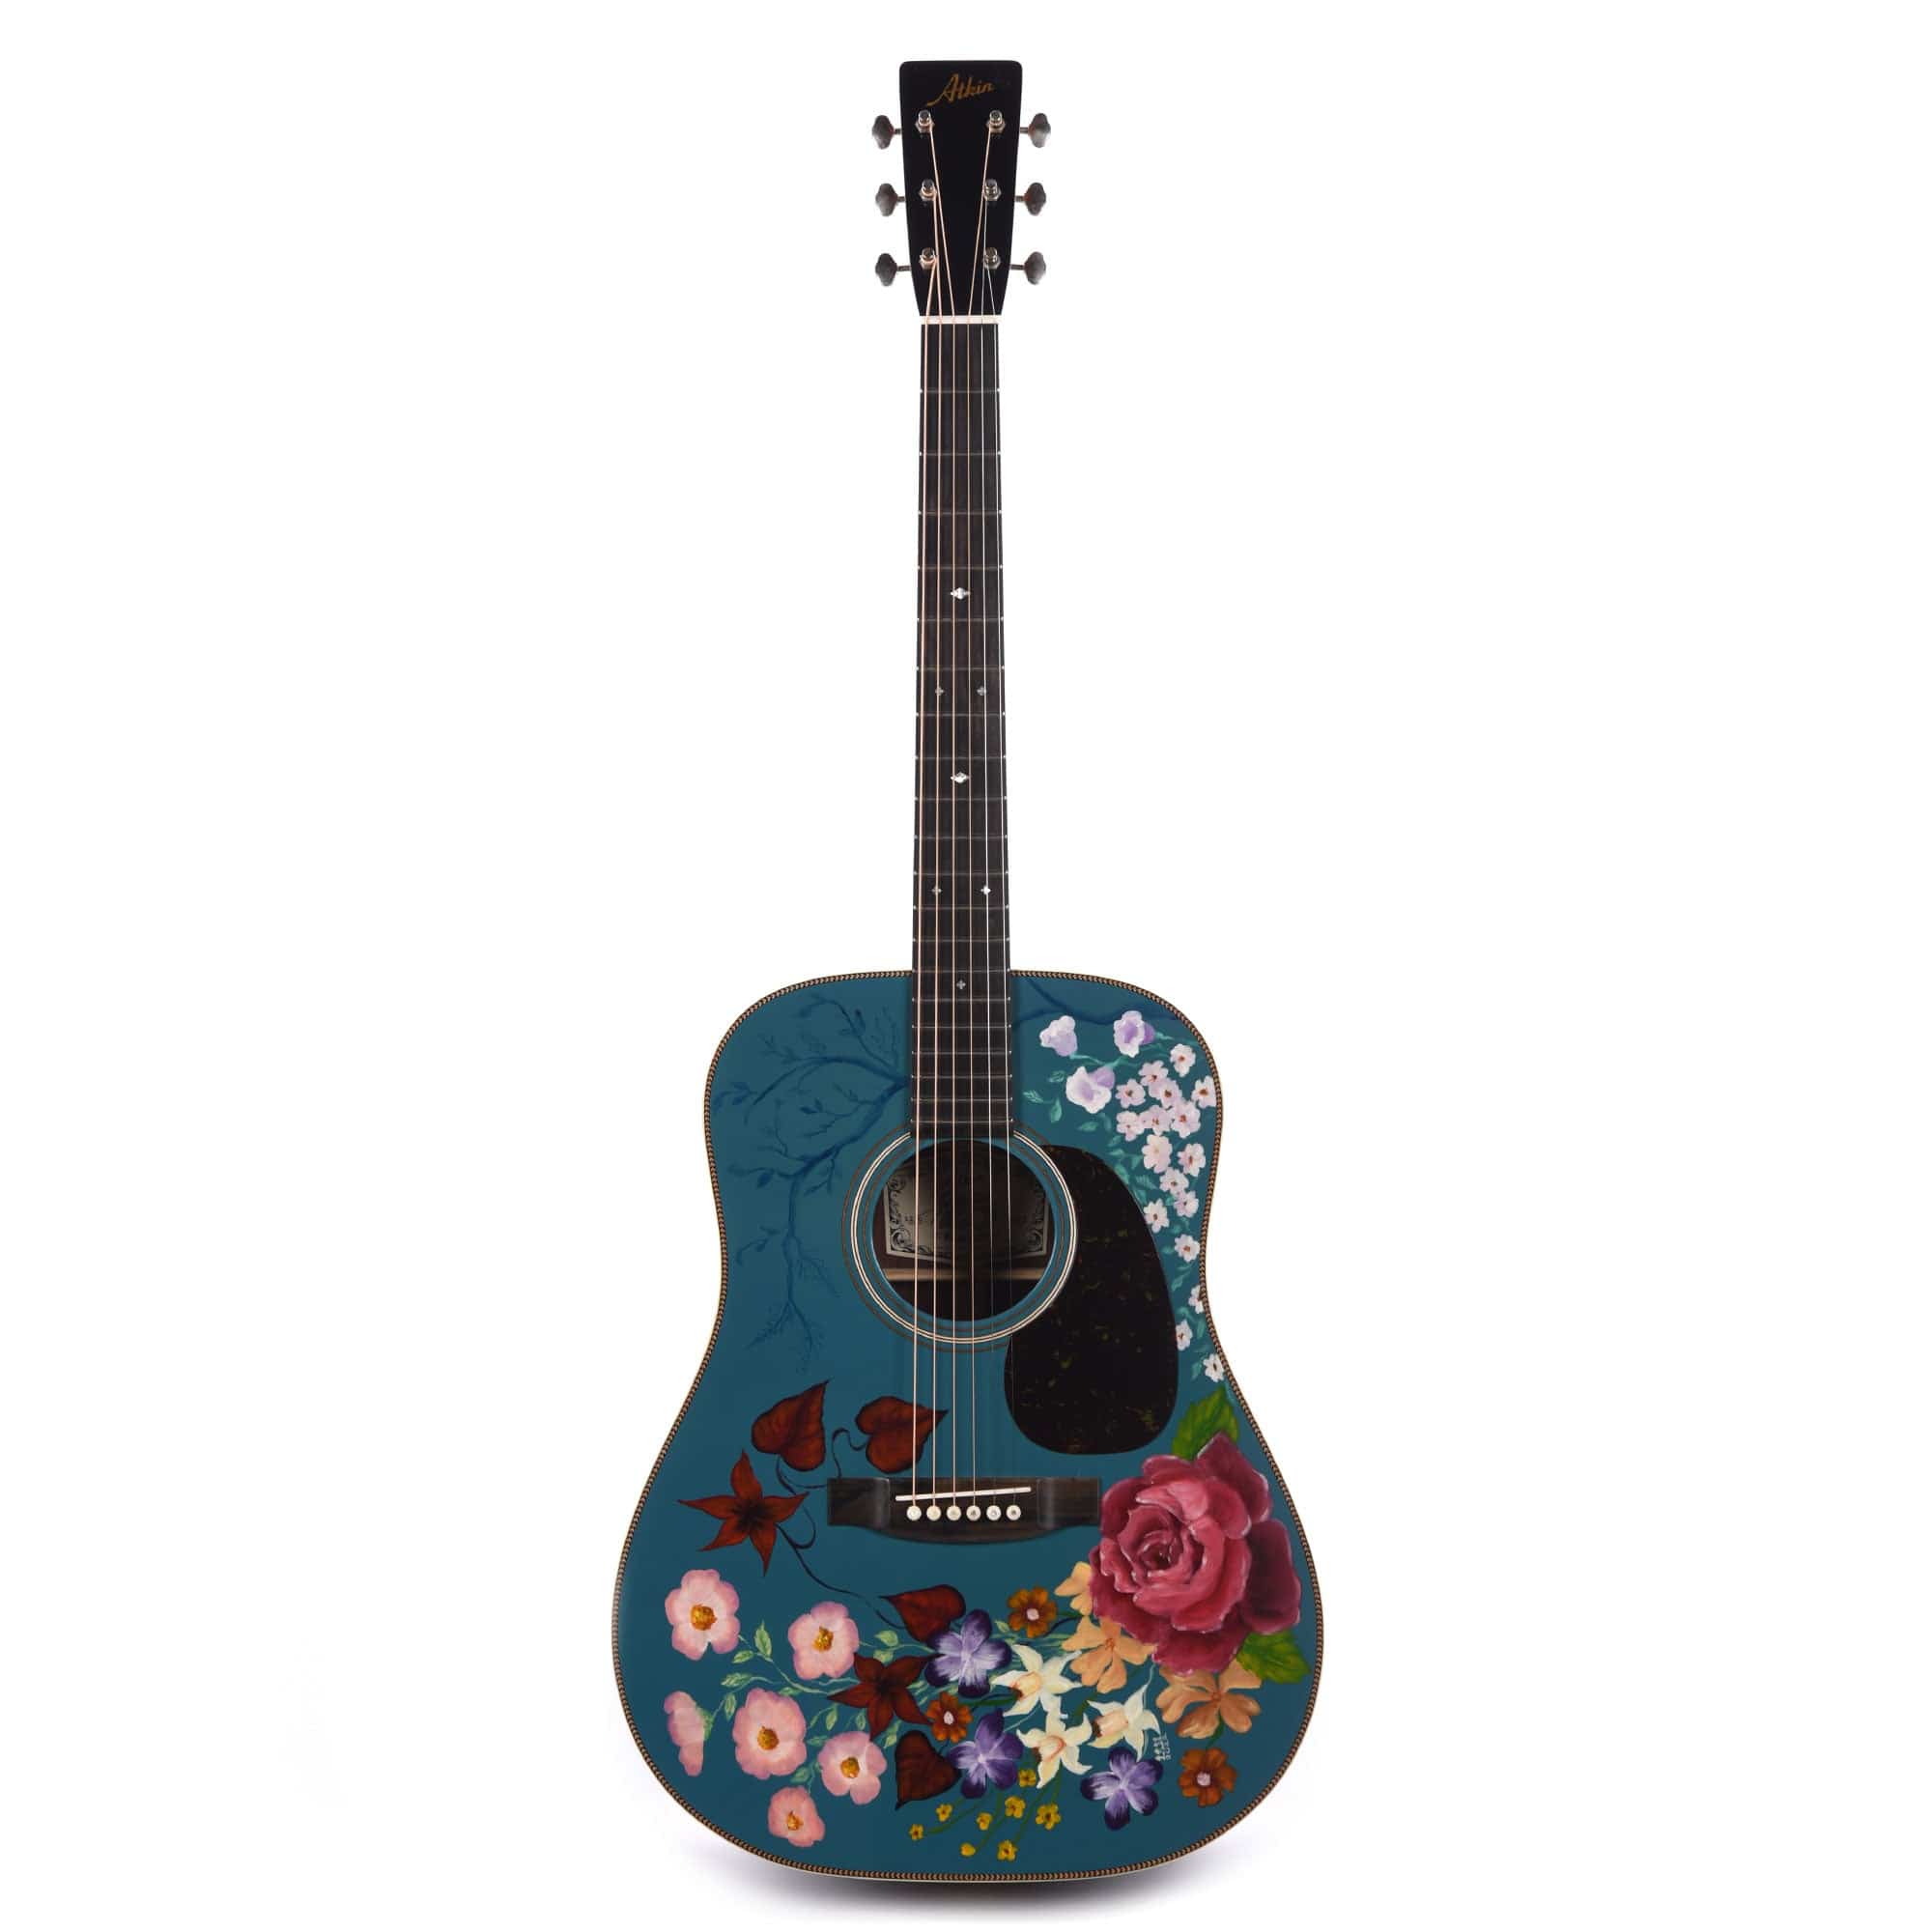 Atkin D37 Baked Sitka/Rosewood Aged Blue Hand Painted by Ian Ward Acoustic Guitars / Dreadnought